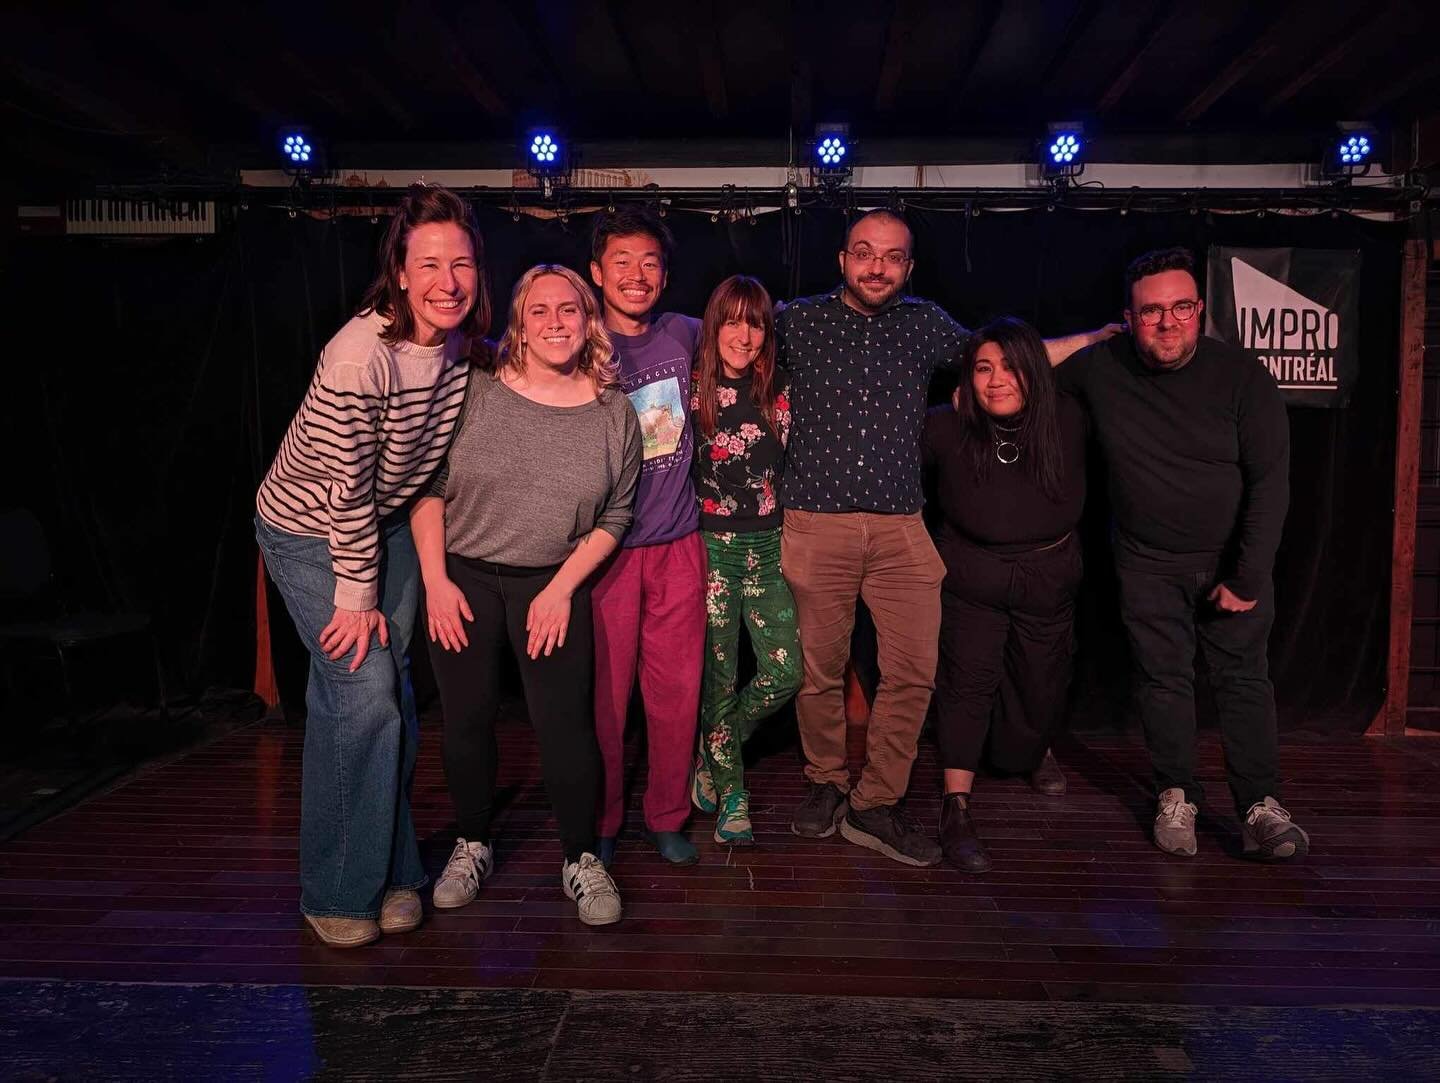 Cheers to the graduates of Level 4 with Danielle Davidson! 🎓🥳

They had a great show last night and we wish all our grads continued improv joy!! ✨ 

Thanks to everyone who came out to support and celebrate all of our fabulous grads! 🤩 

Want to ta